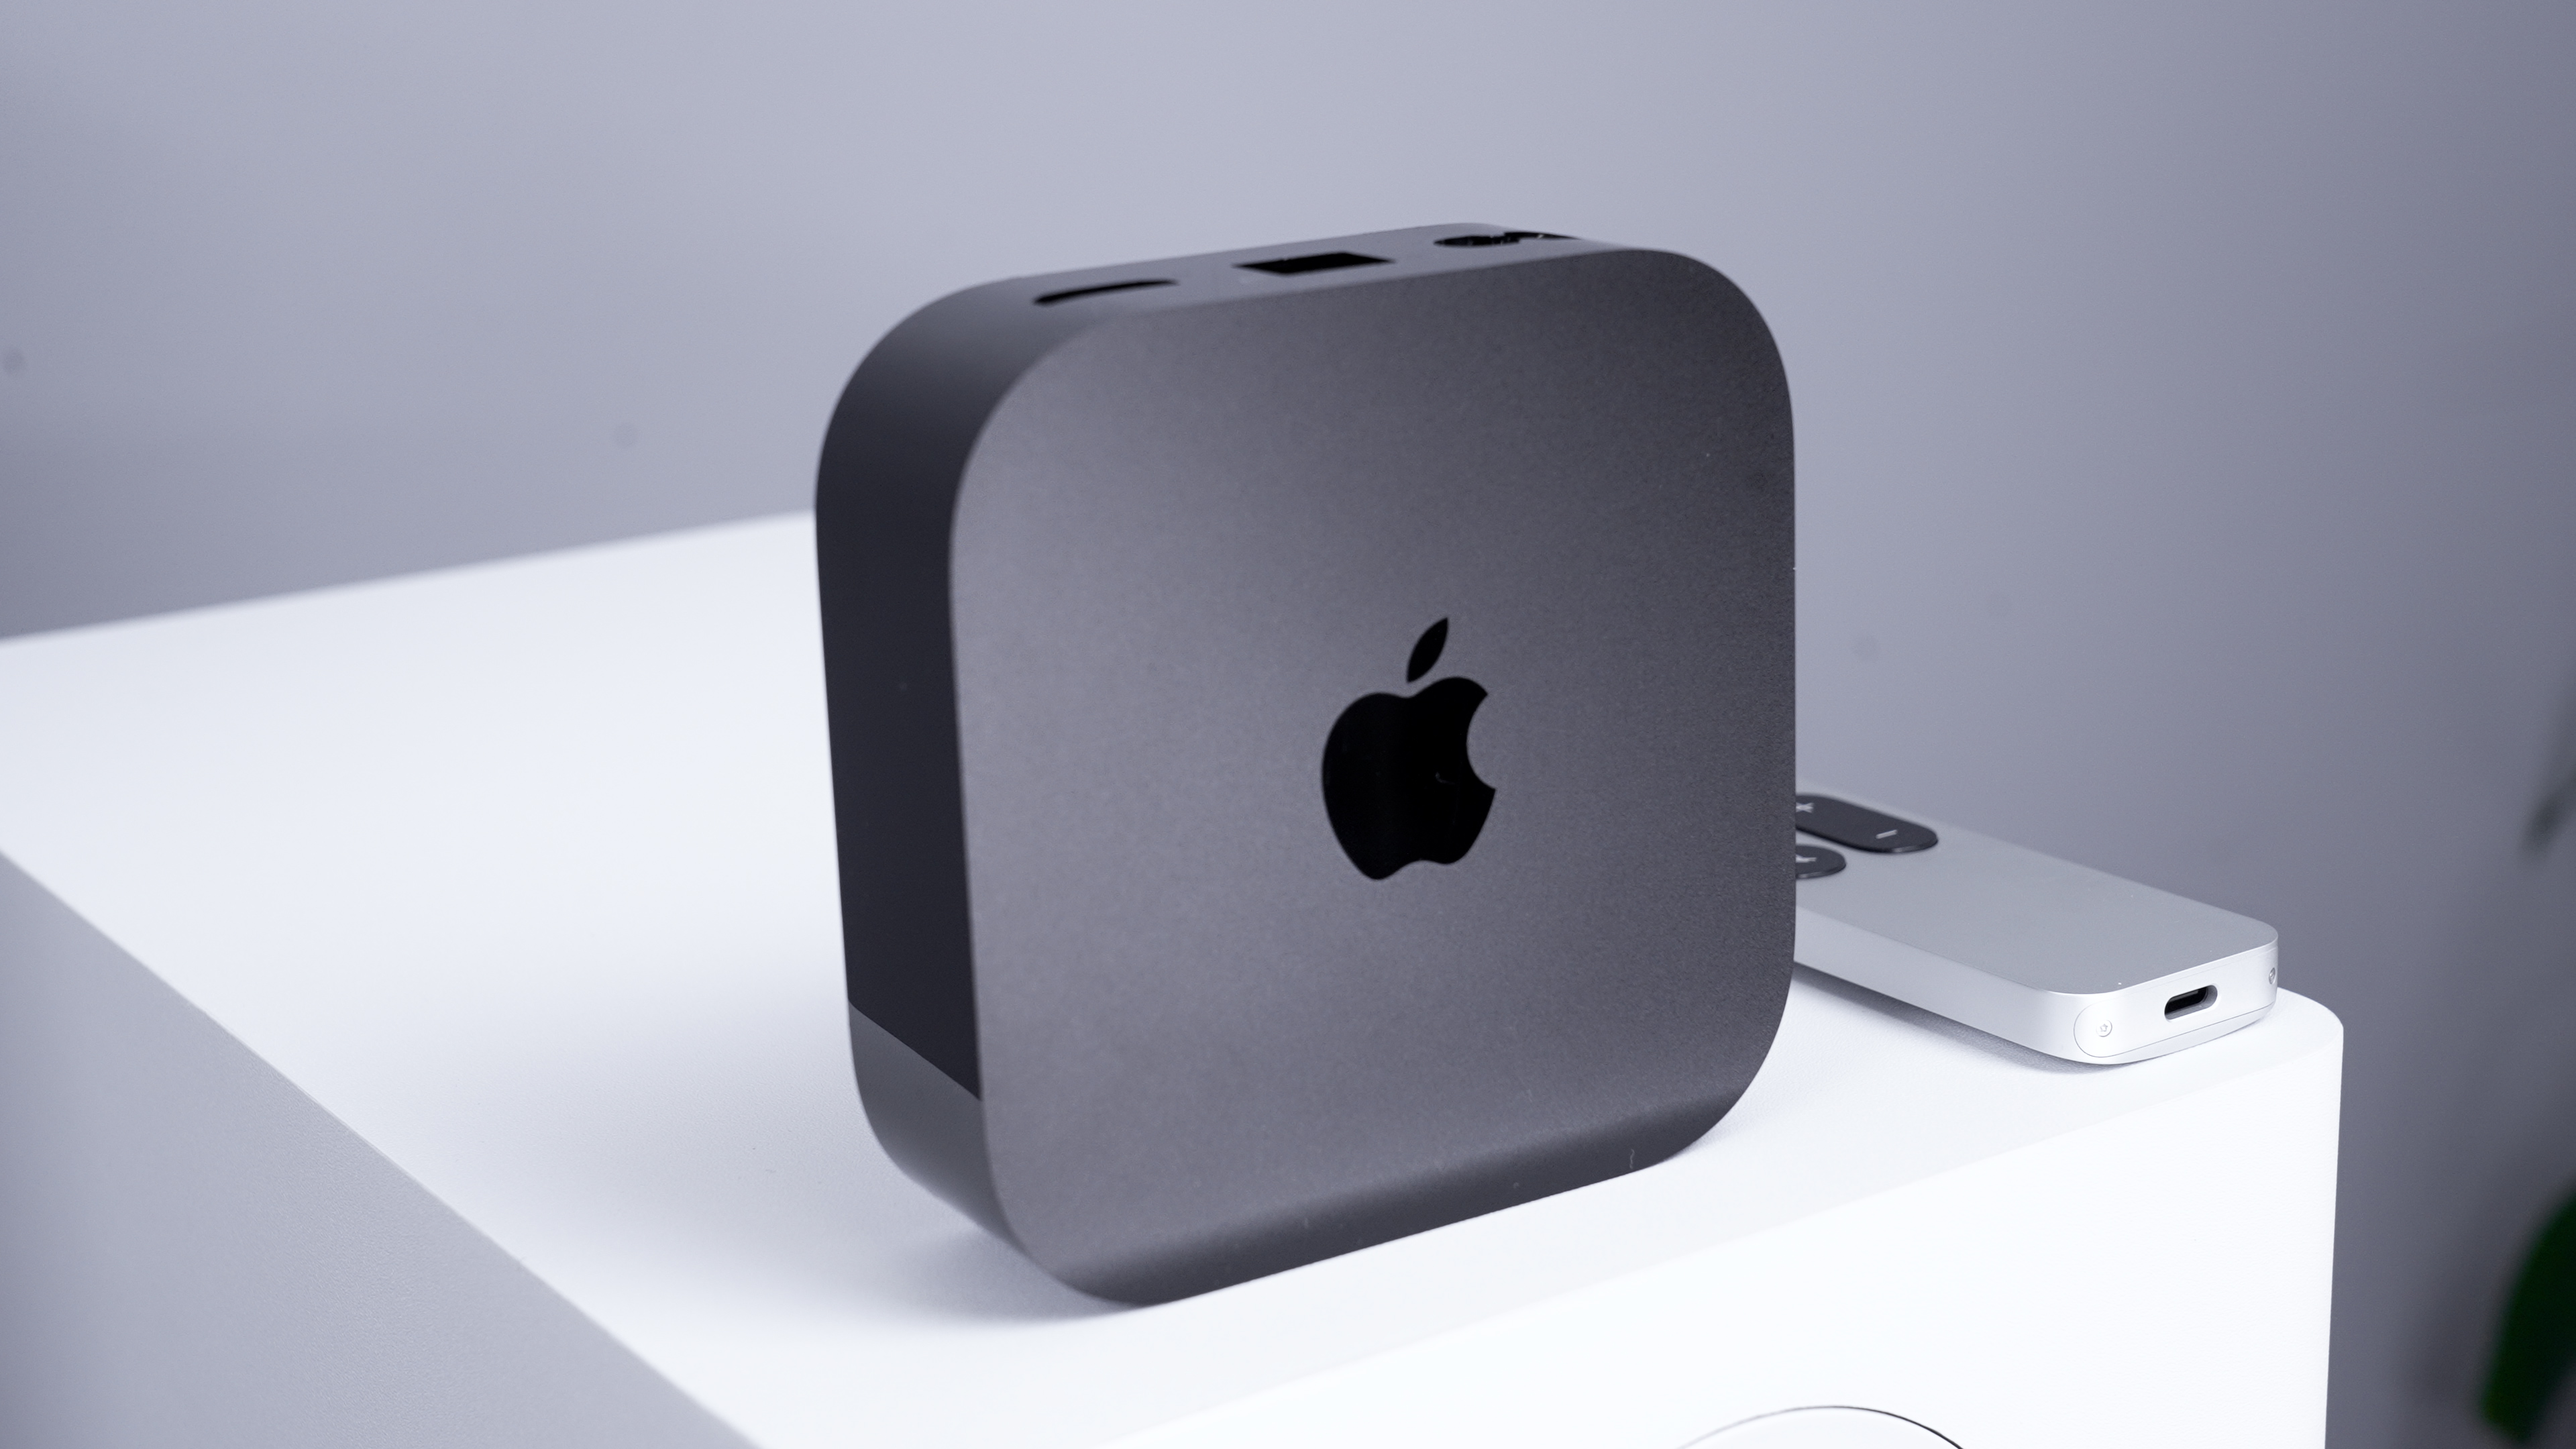 The Apple TV 4K standing vertically with the Apple logo showing from the front